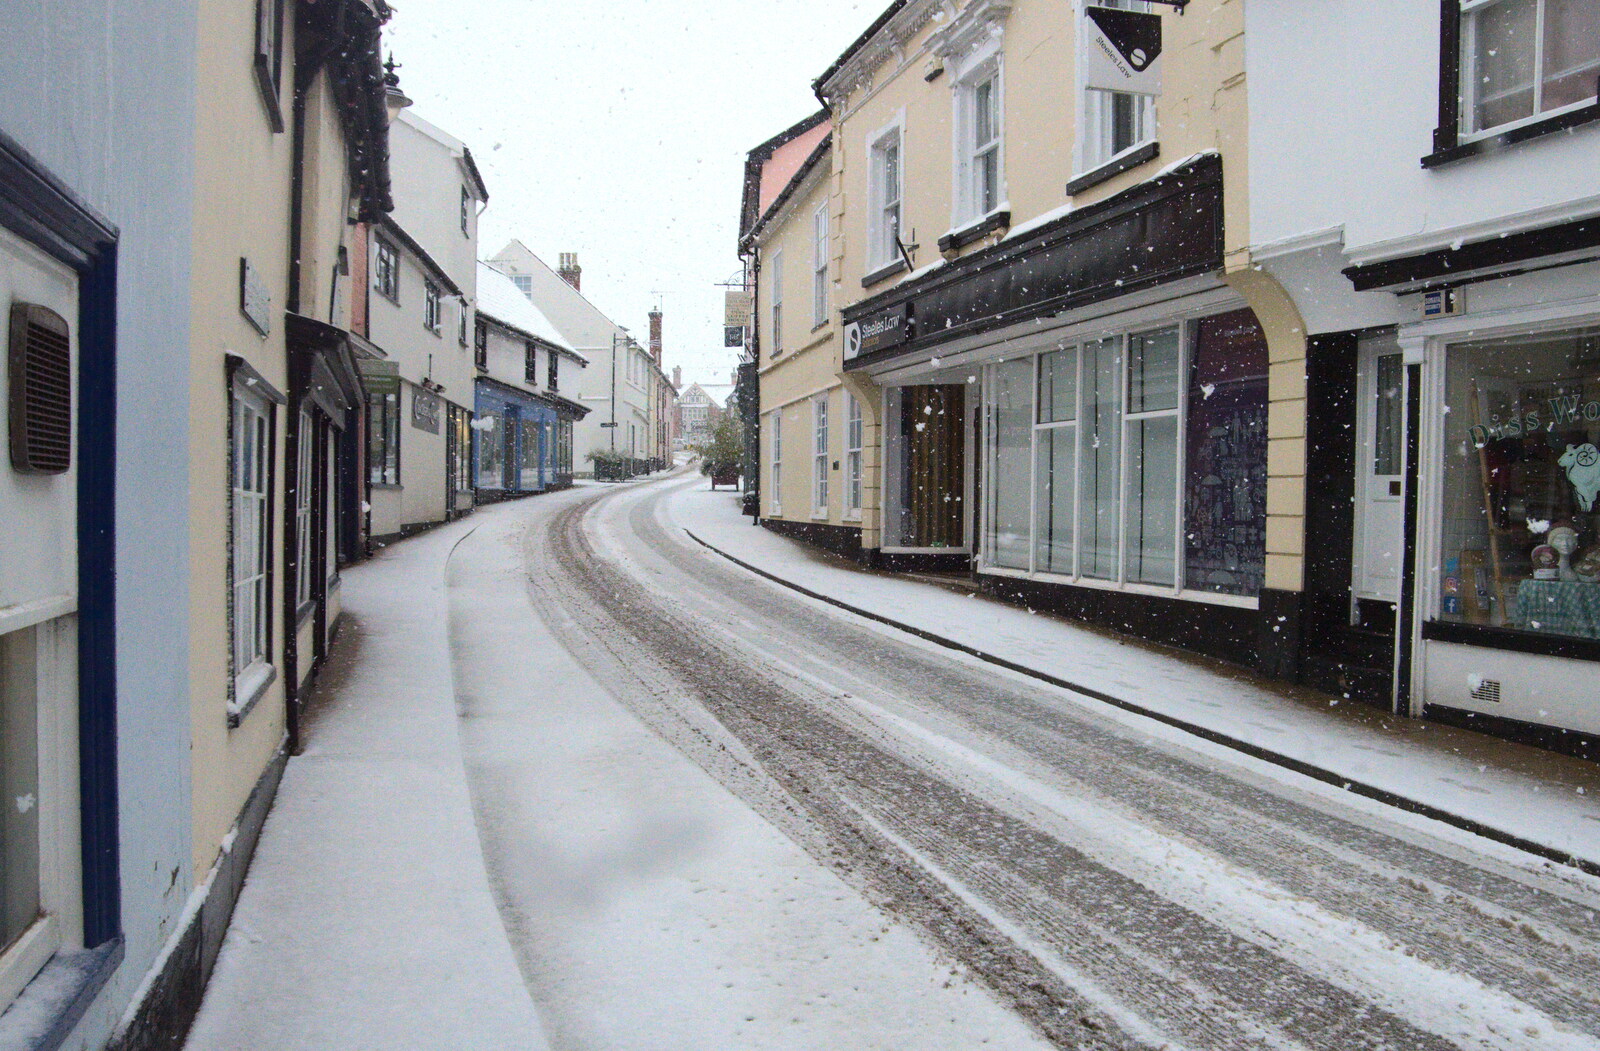 St Nicholas Street from A Snowy Morning, Diss, Norfolk - 16th January 2021